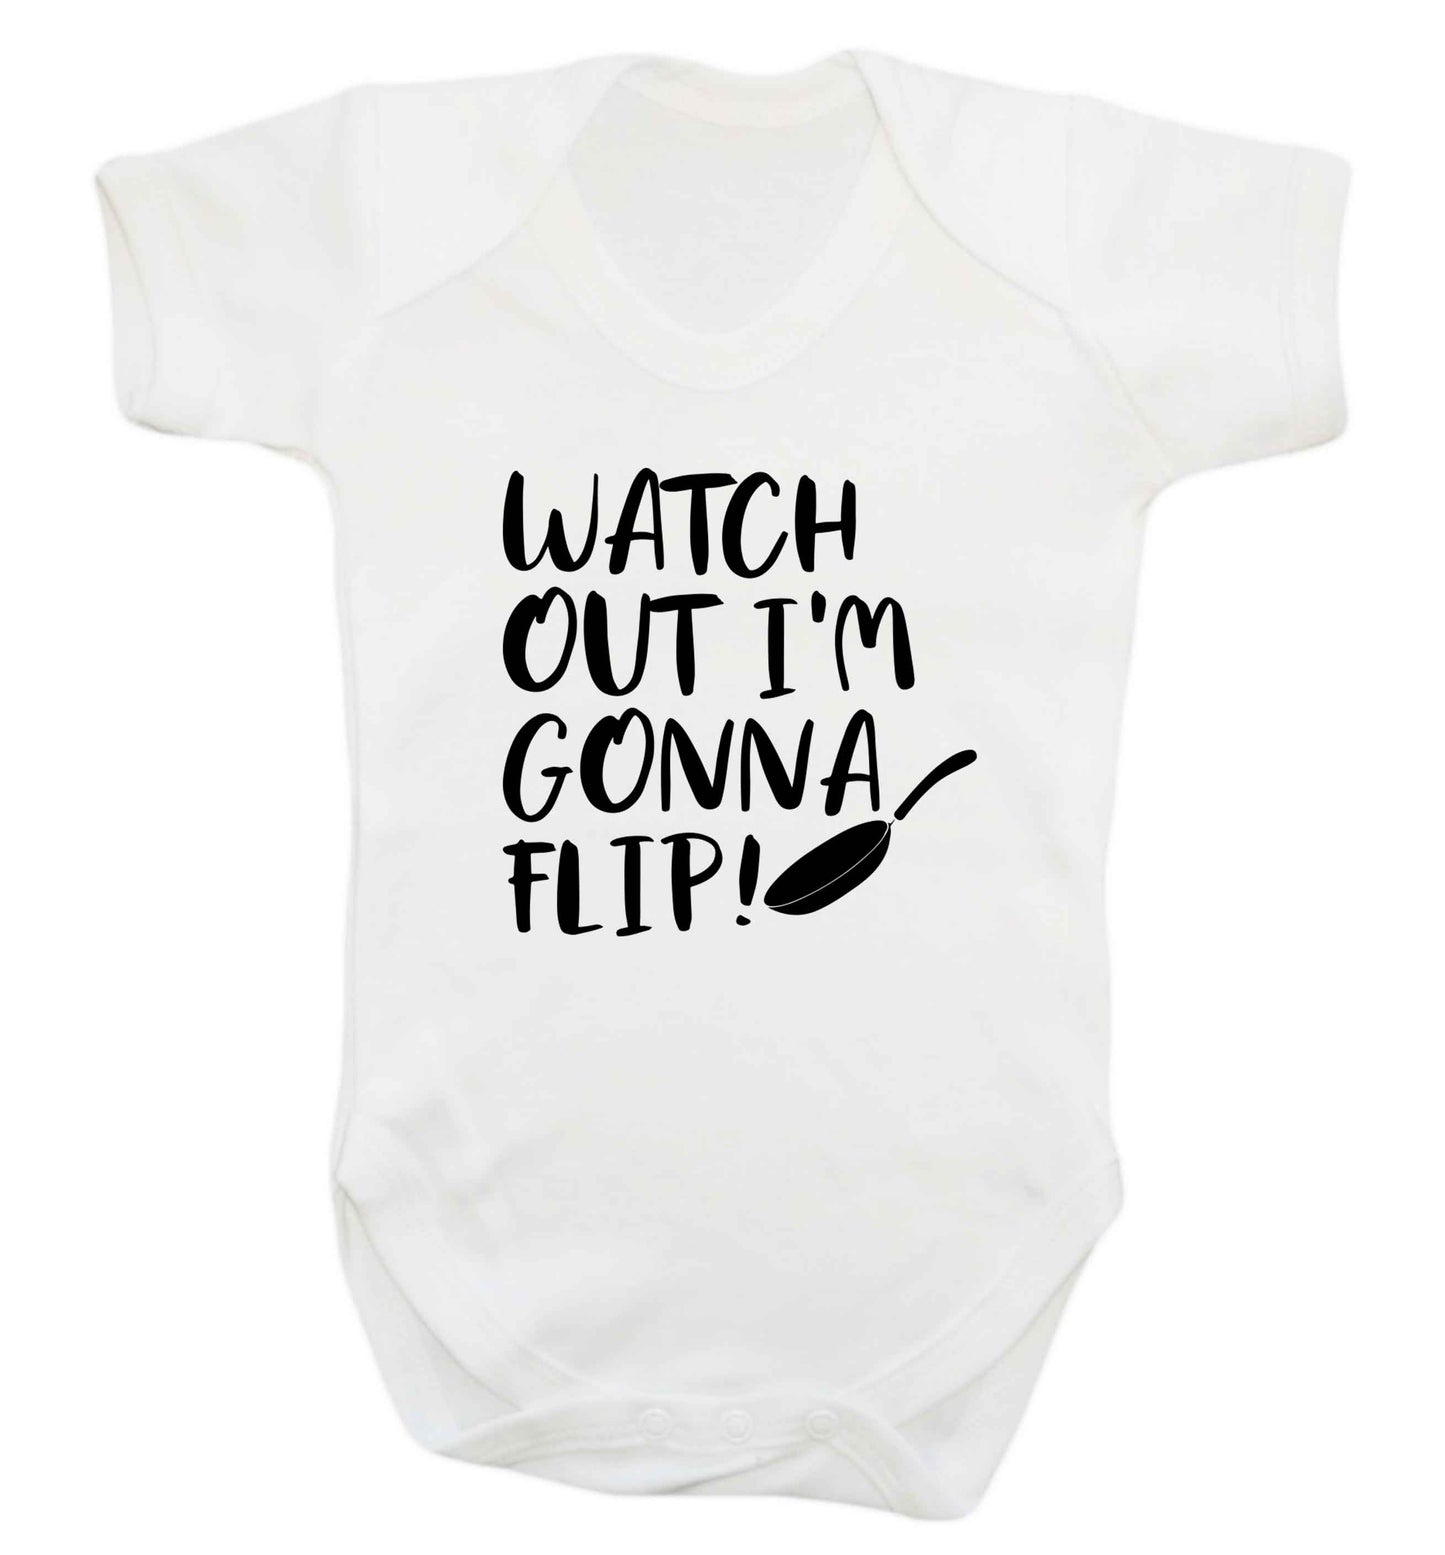 Watch out I'm gonna flip! baby vest white 18-24 months